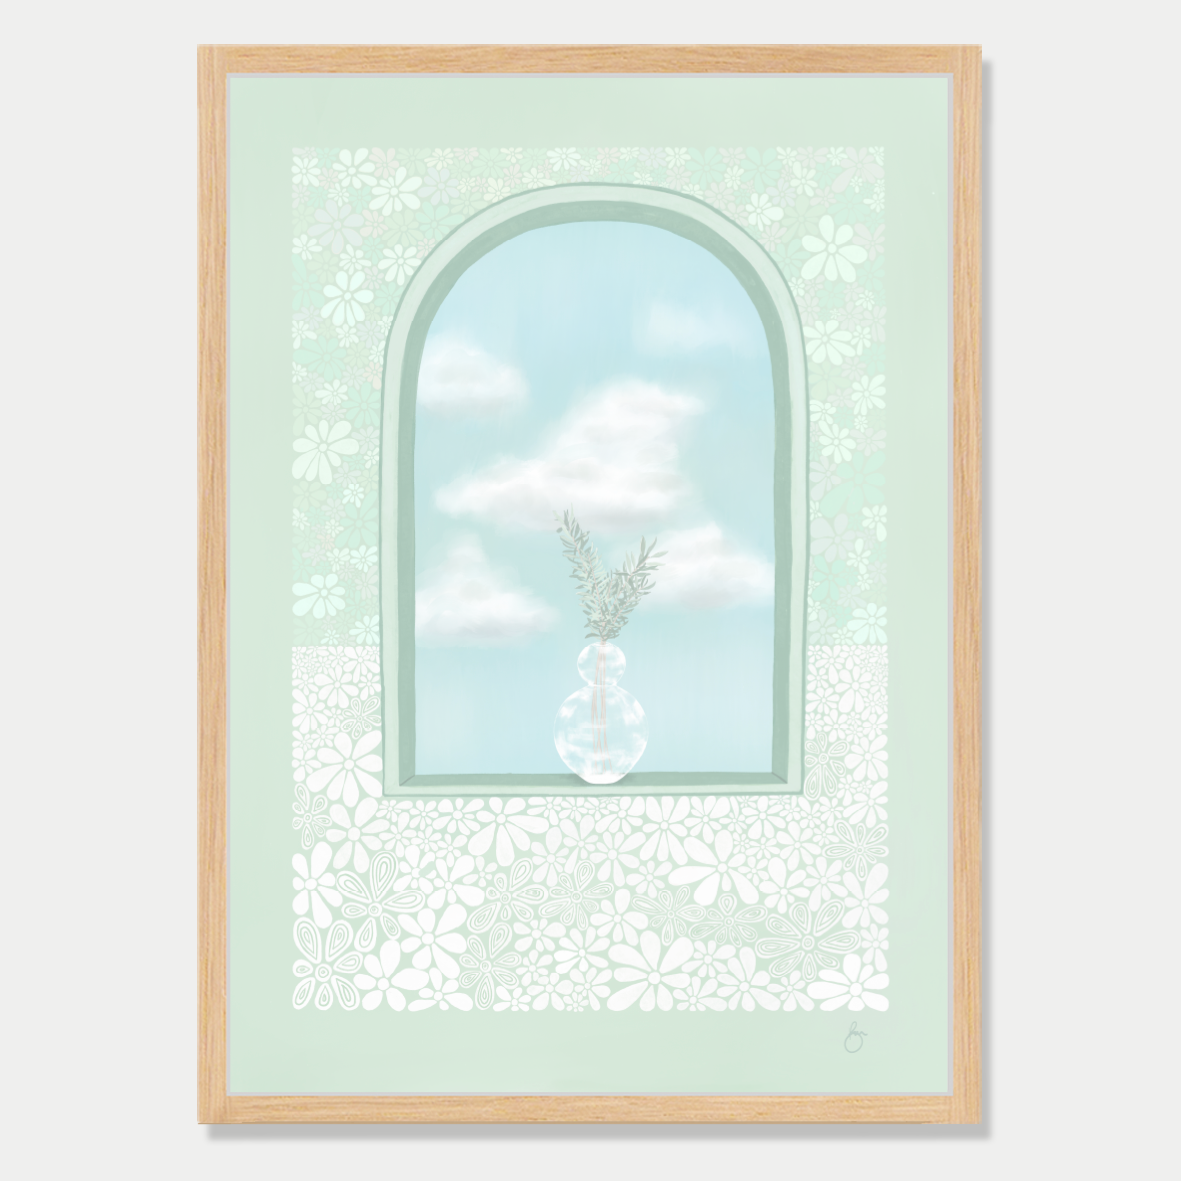 Art print of an arched window with a plant sitting in it and a view of fluffy clouds, in a pastel mint colour palette, by Bon Jung. Printed in New Zealand by endemicworld and framed in raw oak.